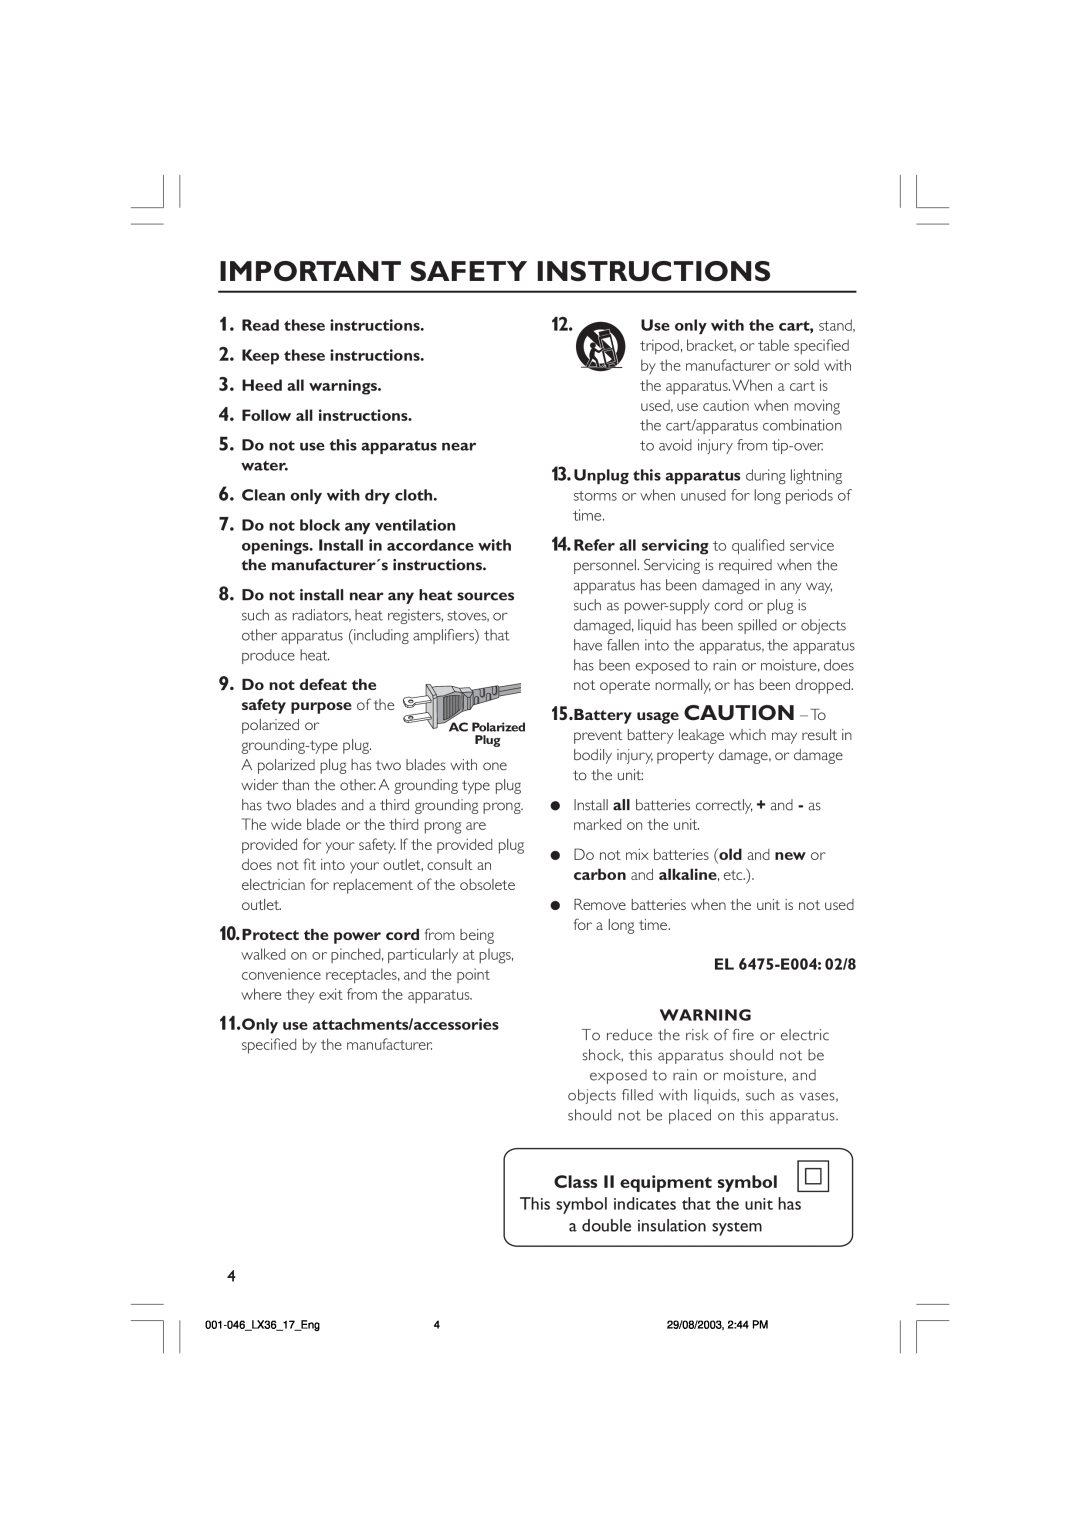 Philips LX3600 Class II equipment symbol, Important Safety Instructions, Read these instructions, Follow all instructions 